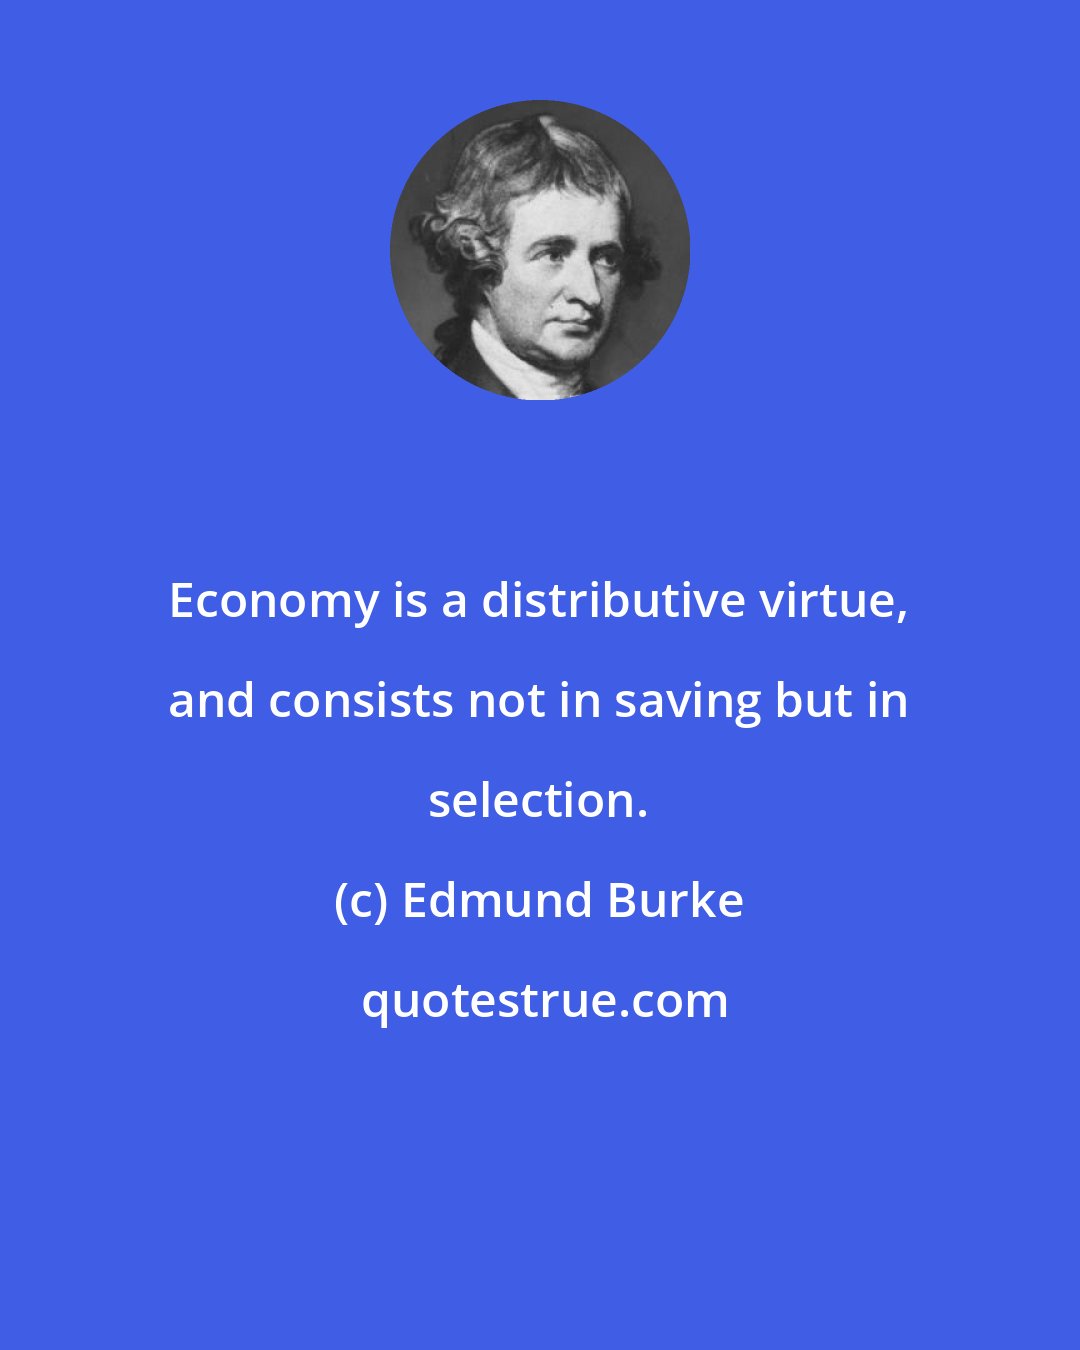 Edmund Burke: Economy is a distributive virtue, and consists not in saving but in selection.